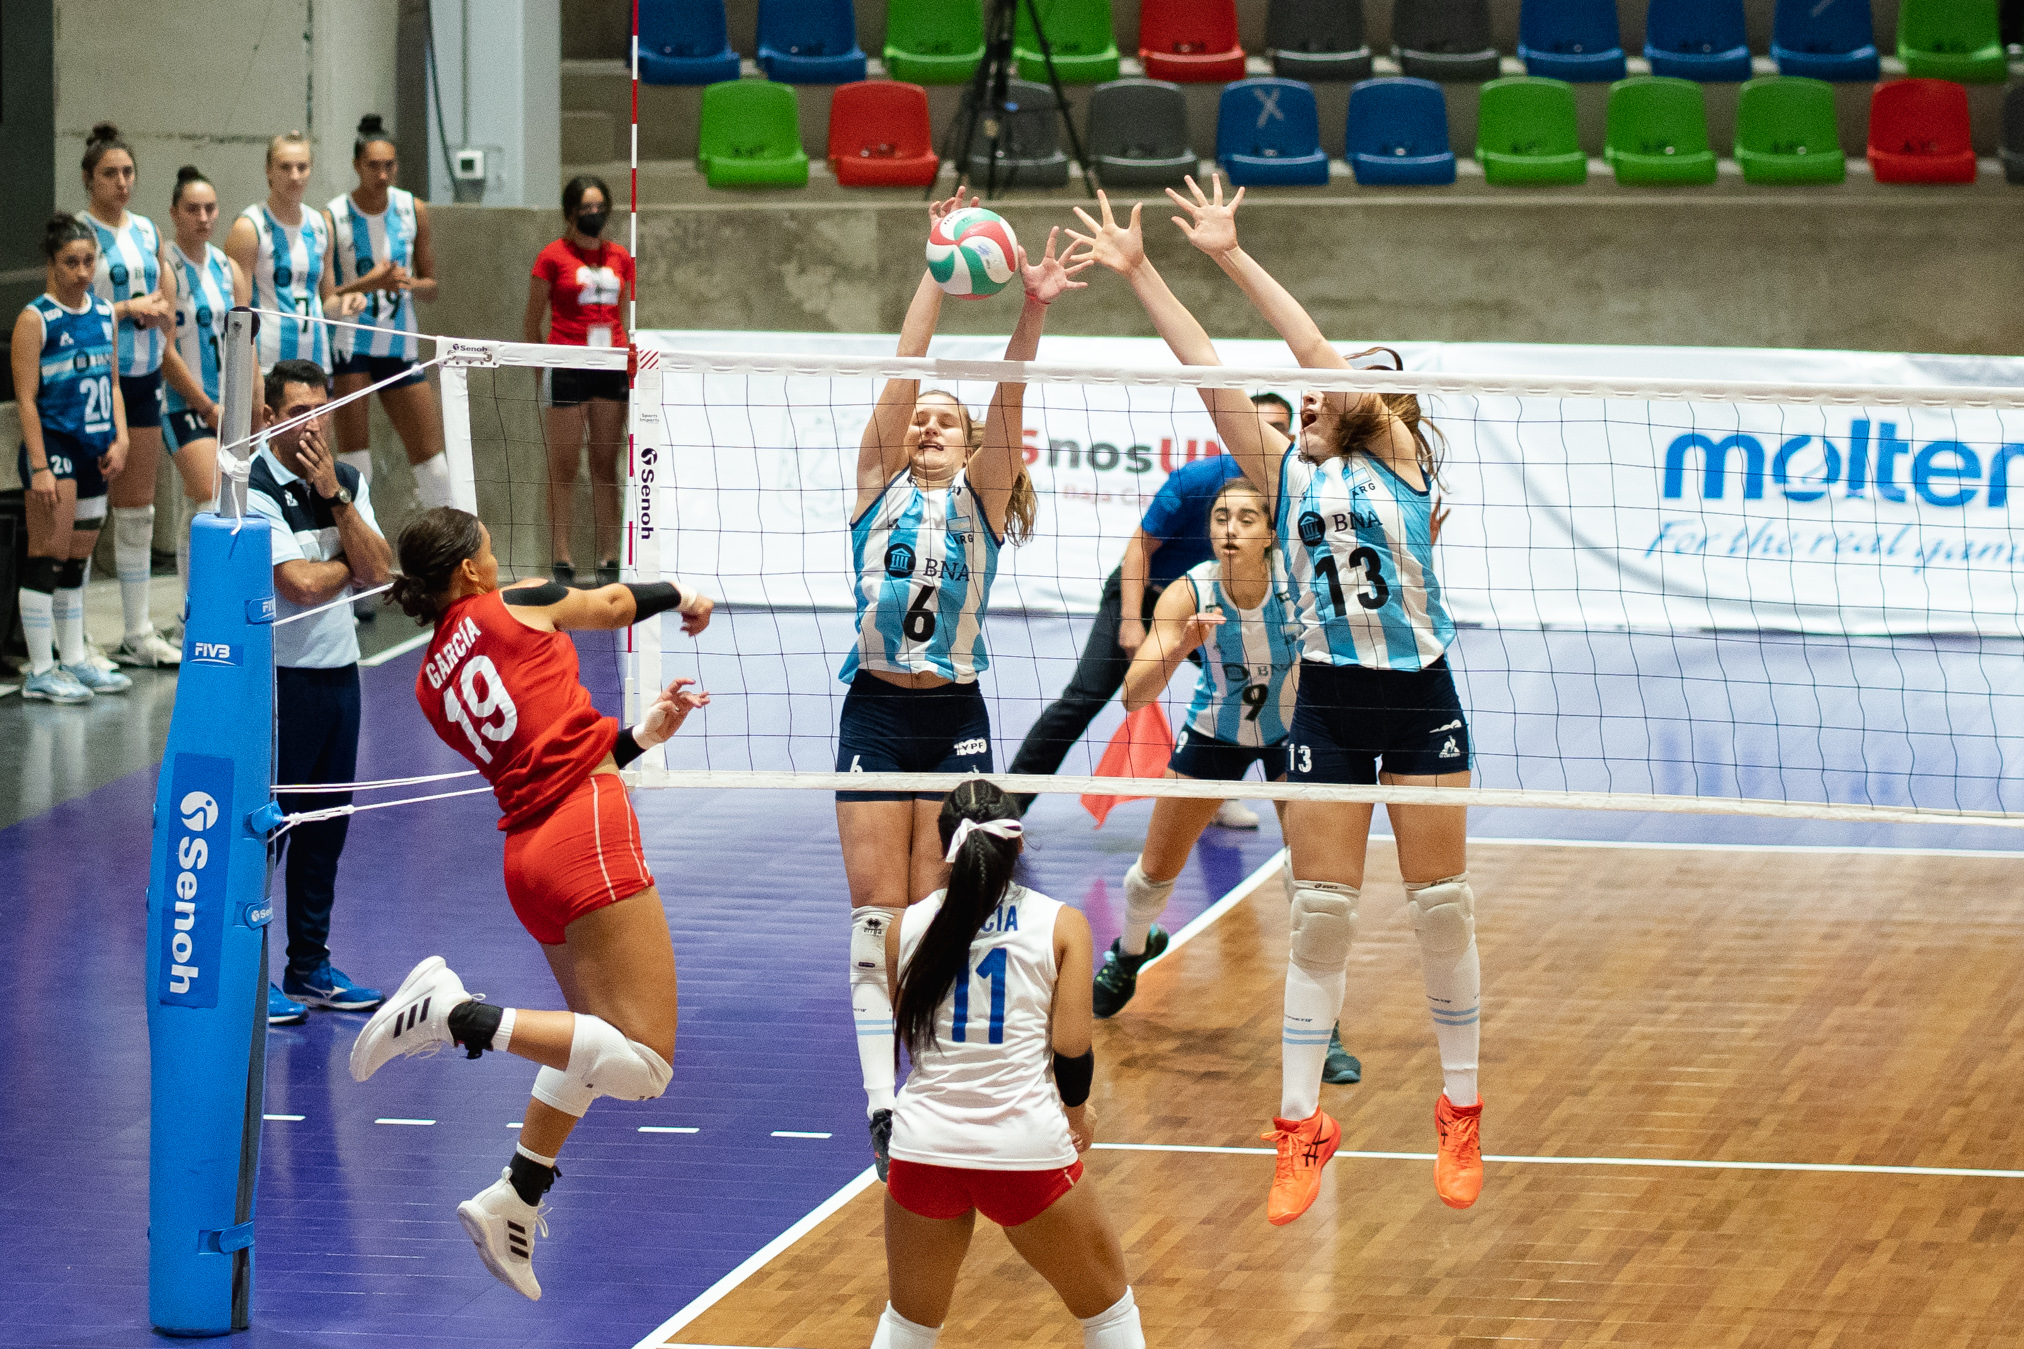 Argentina dominated Puerto Rico to move into semifinals